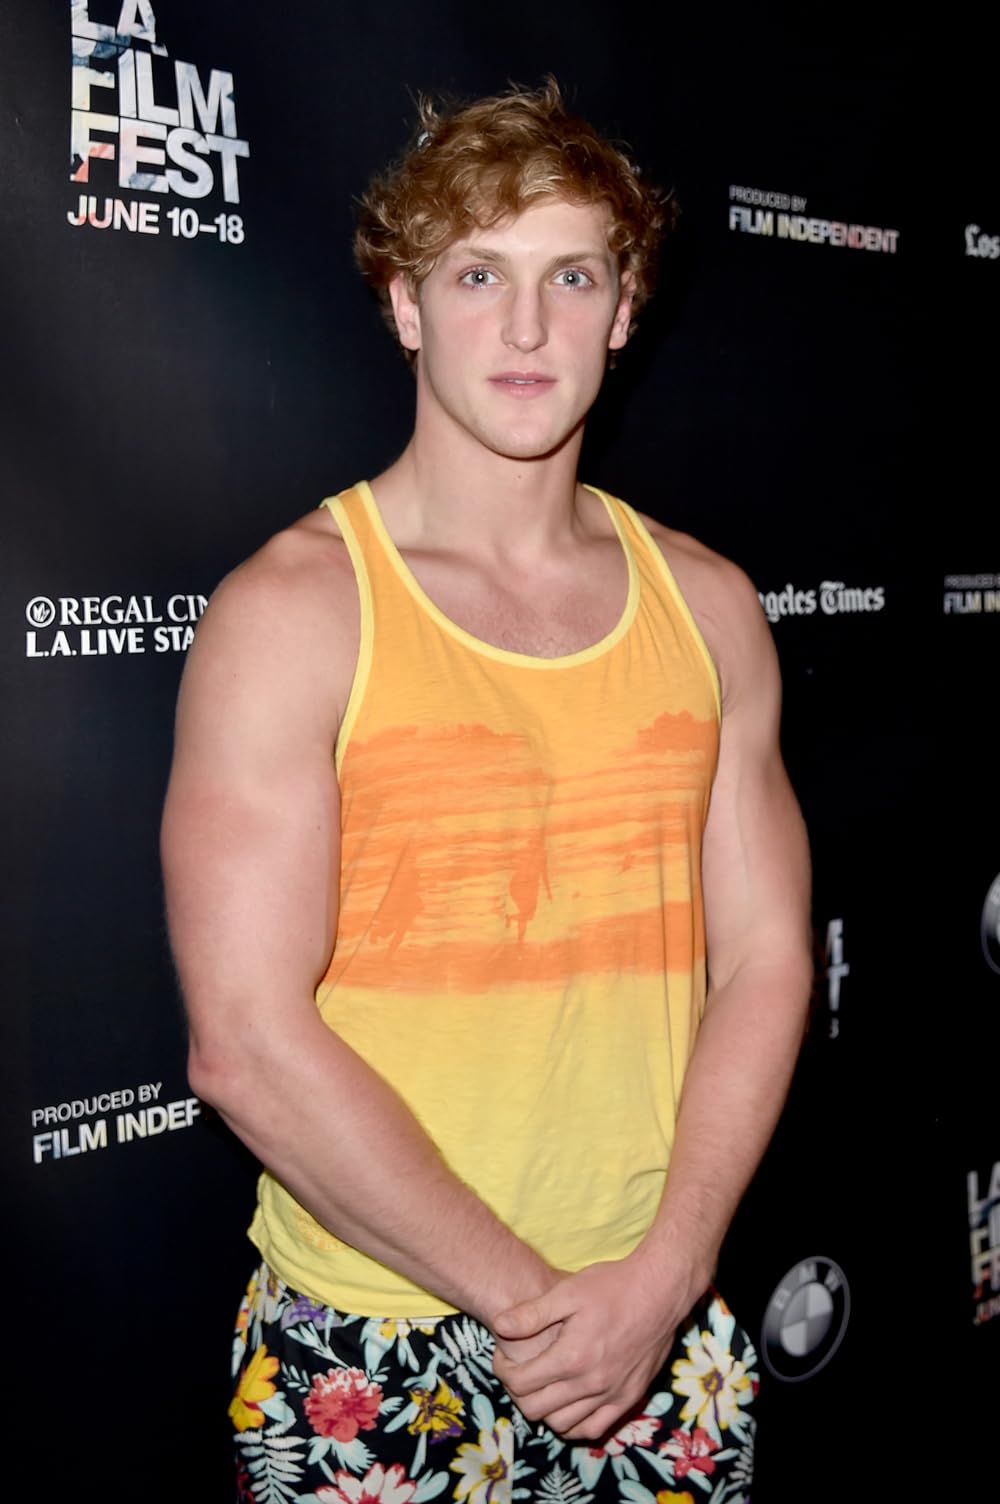 anthony casamento recommends Logan Paul Dick